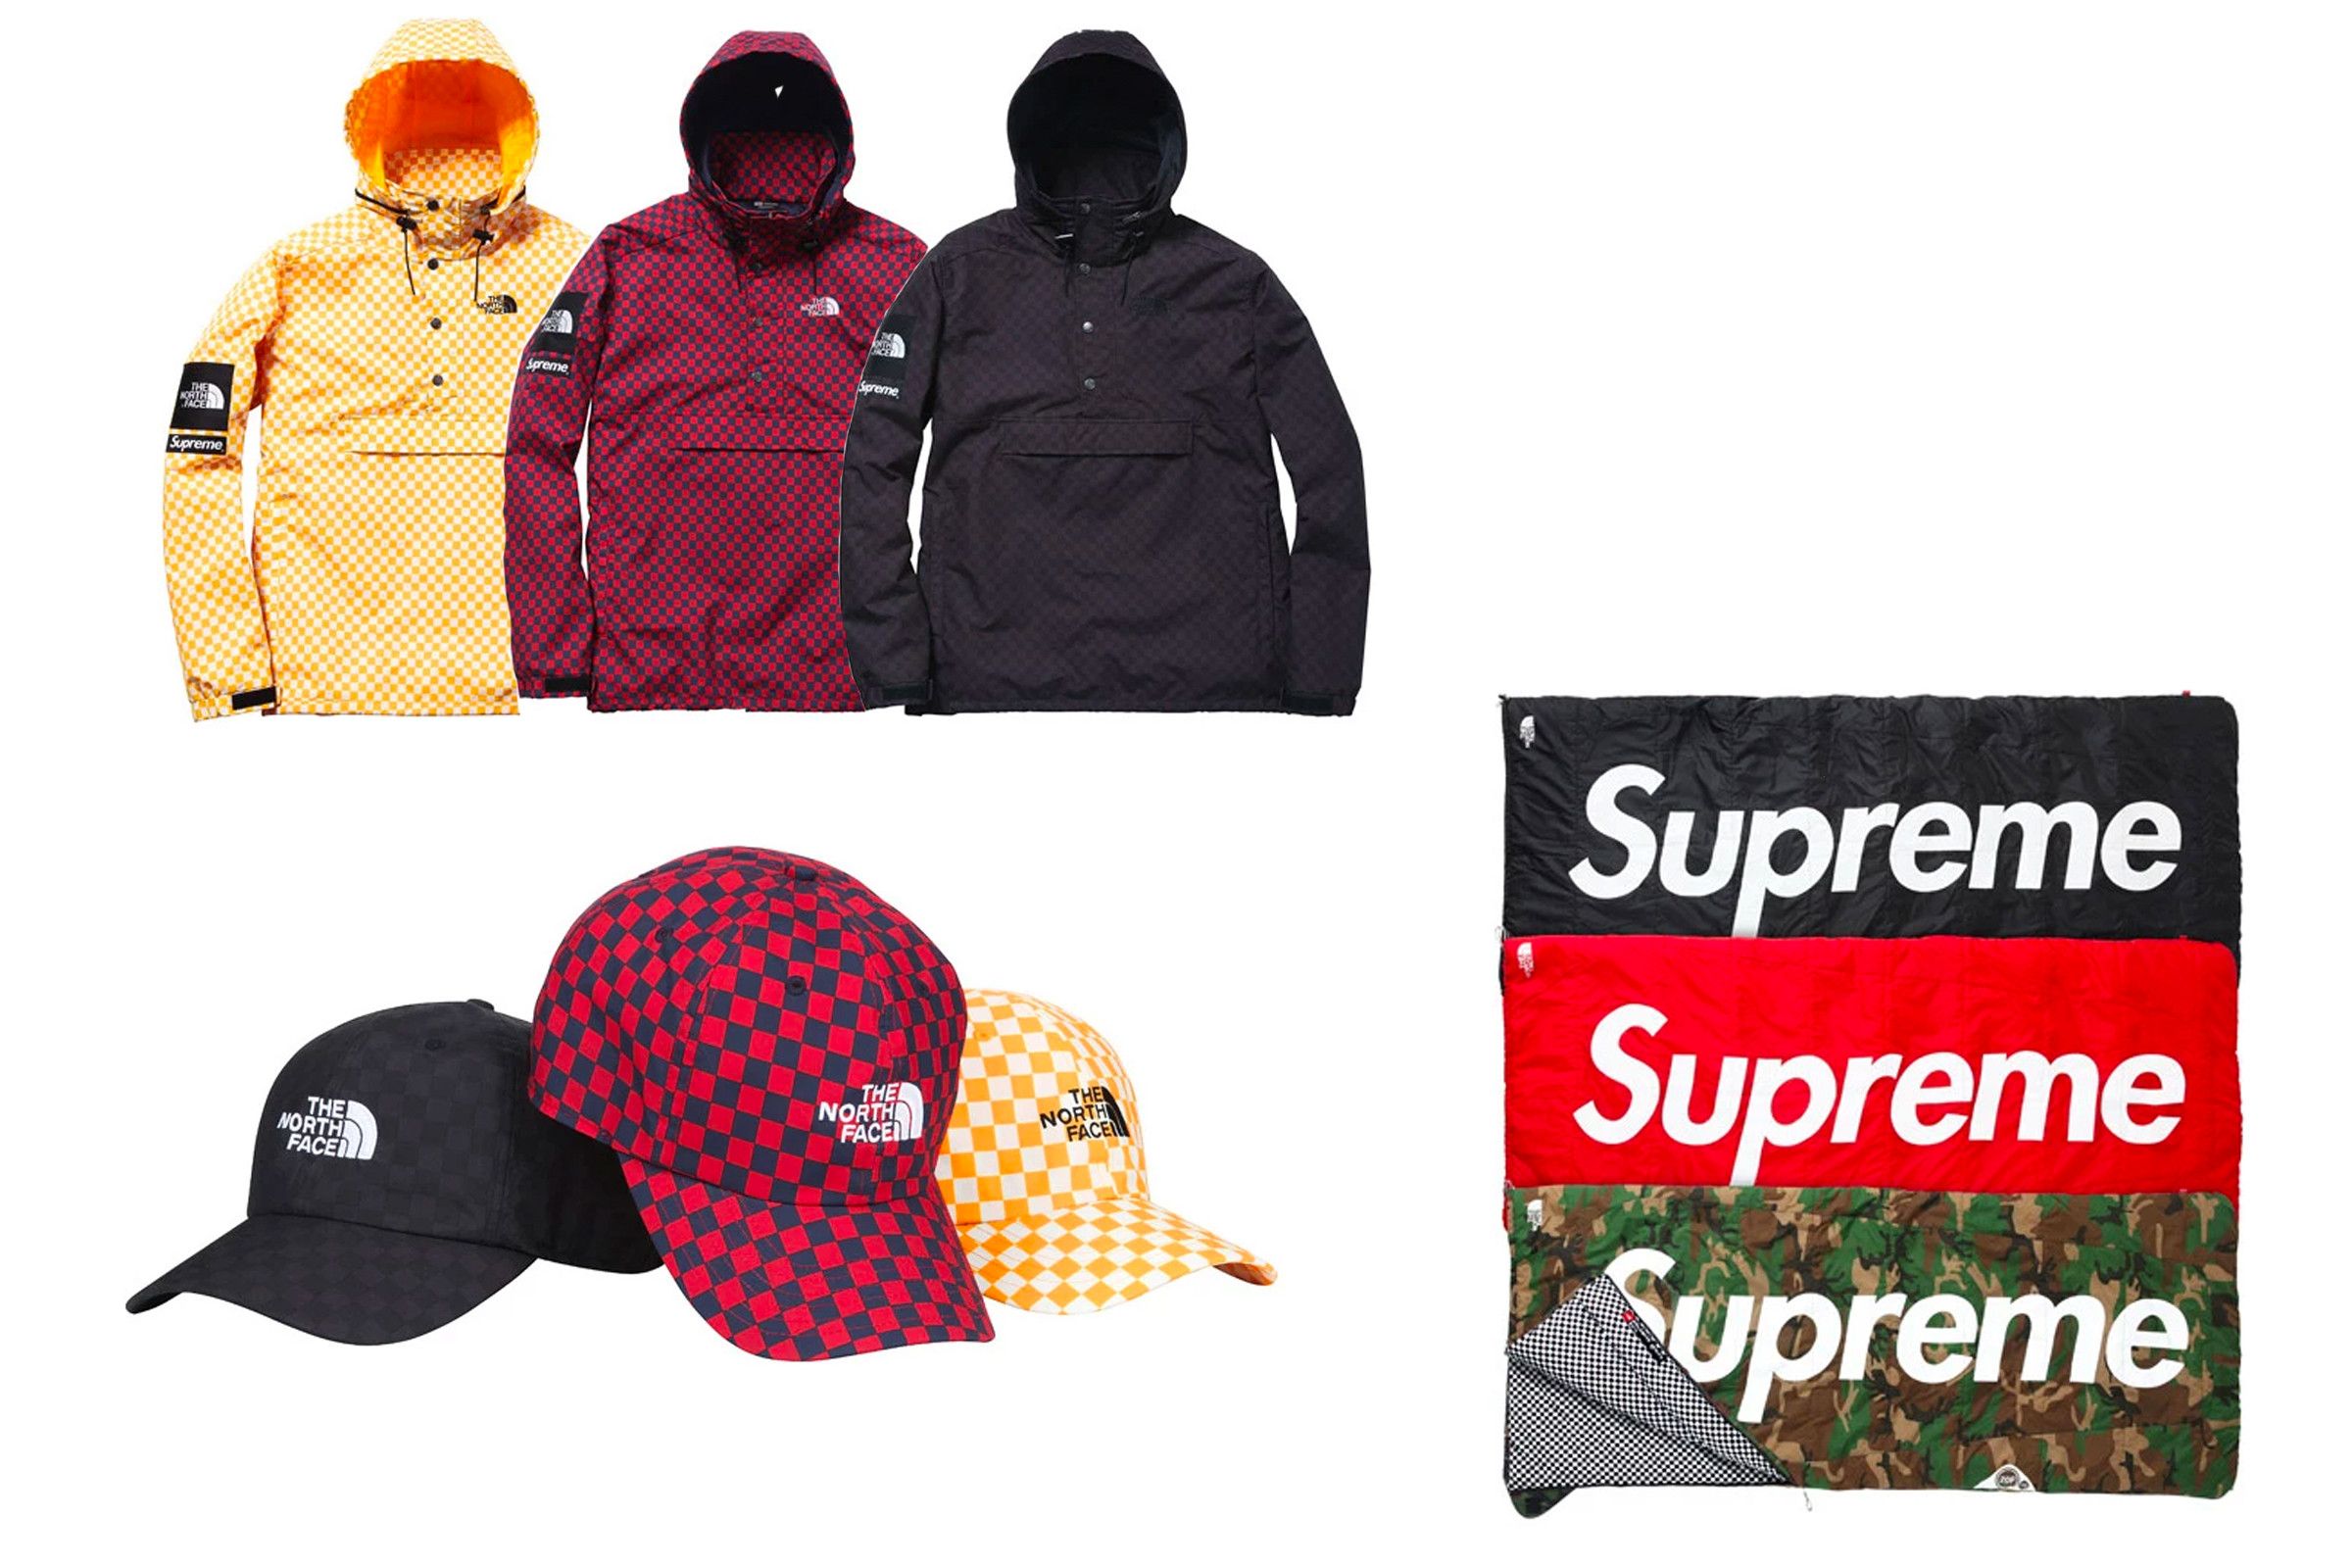 Supreme x The North Face SS19 Drop Street Style